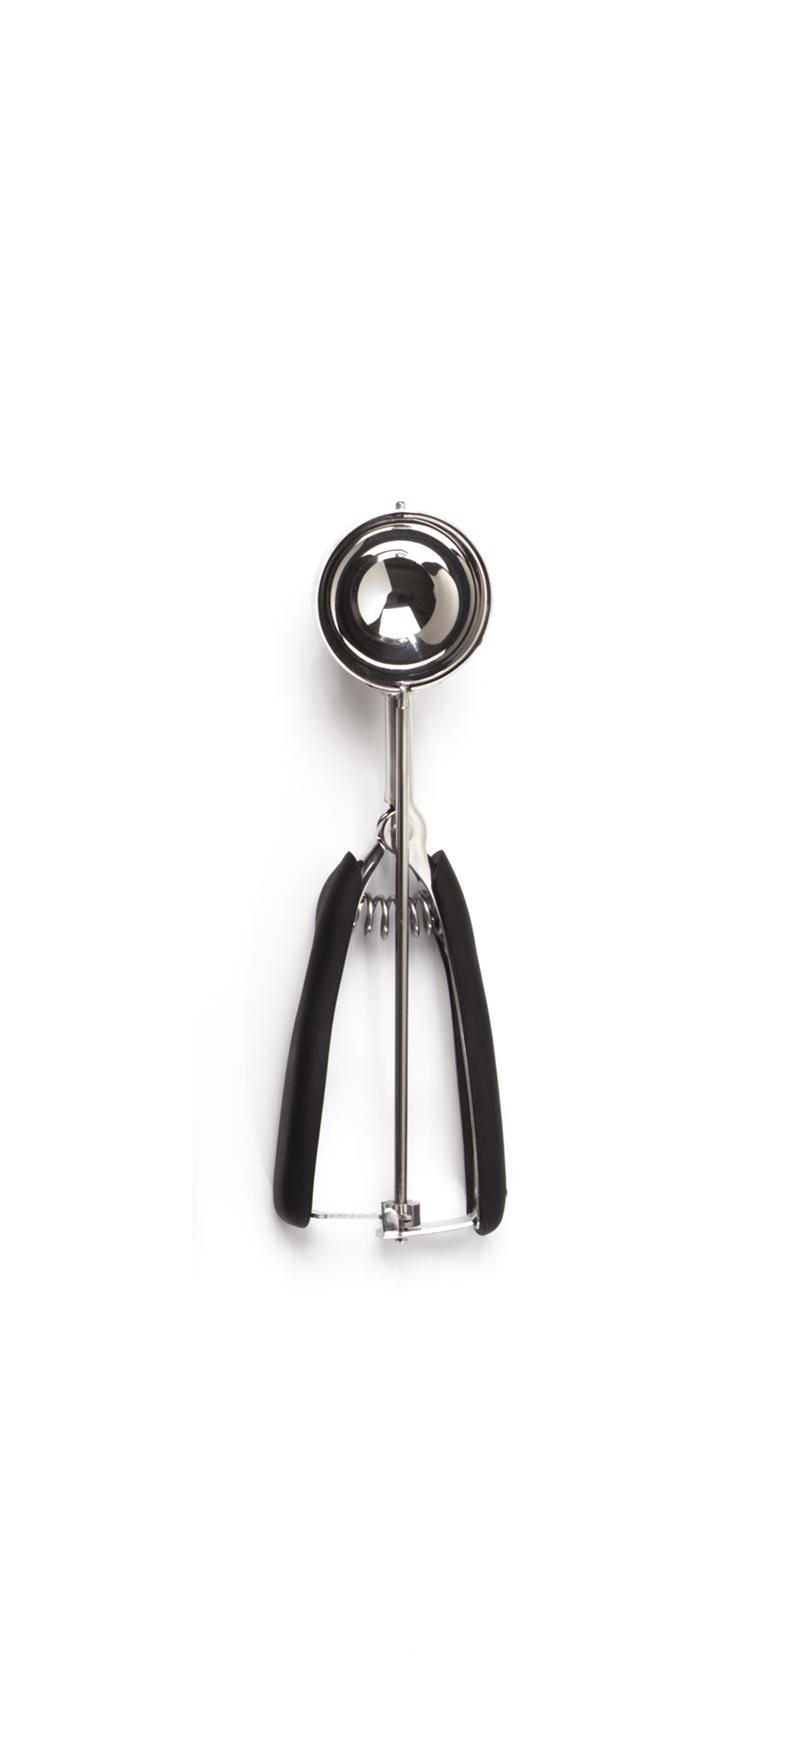 Oxo Large Cookie Scoop - The Peppermill